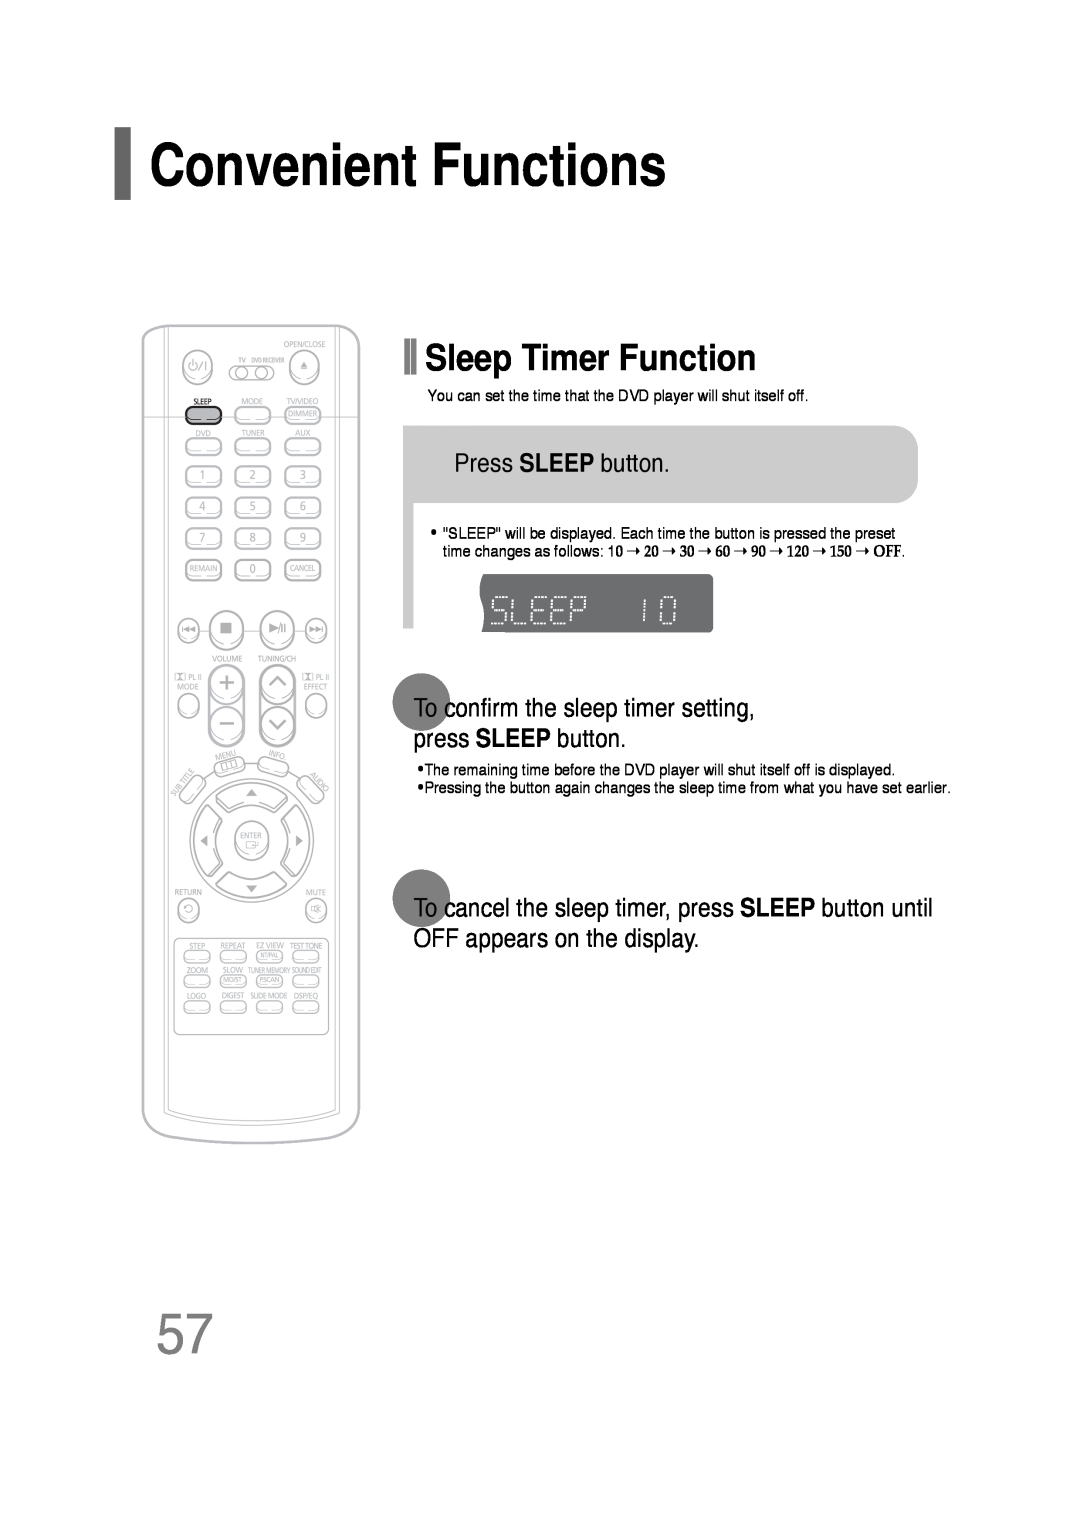 Samsung HT-P30 Convenient Functions, Sleep Timer Function, Press SLEEP button, OFF appears on the display 